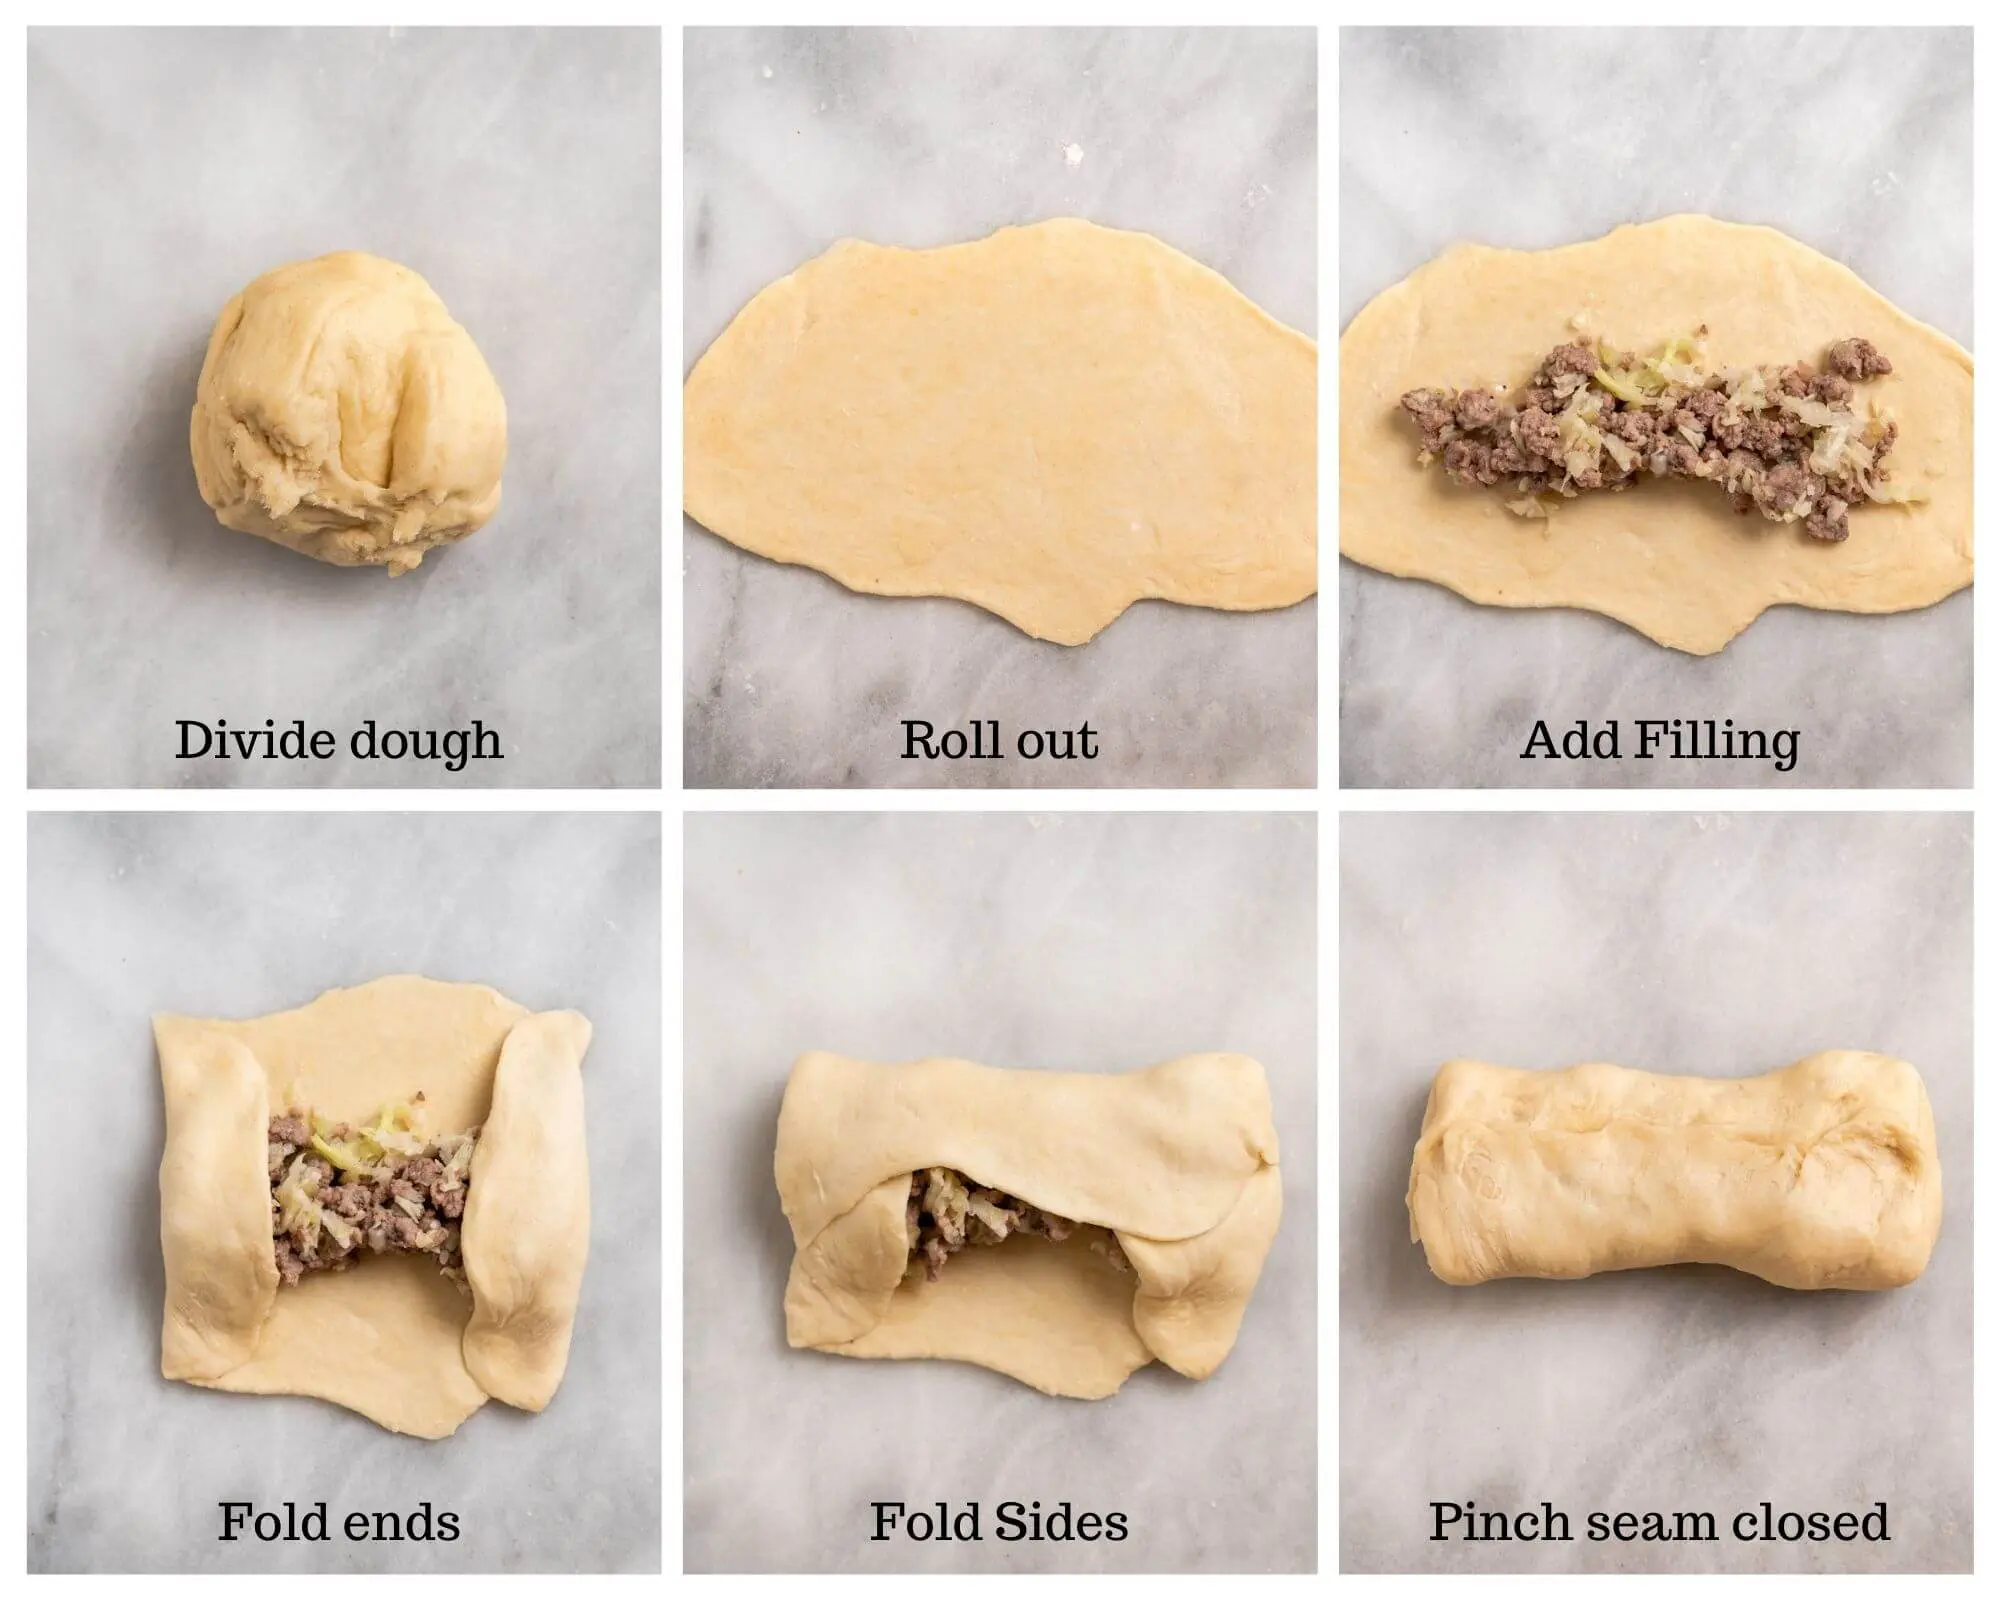 6 photos showing how to assemble meat filling in bread dough.